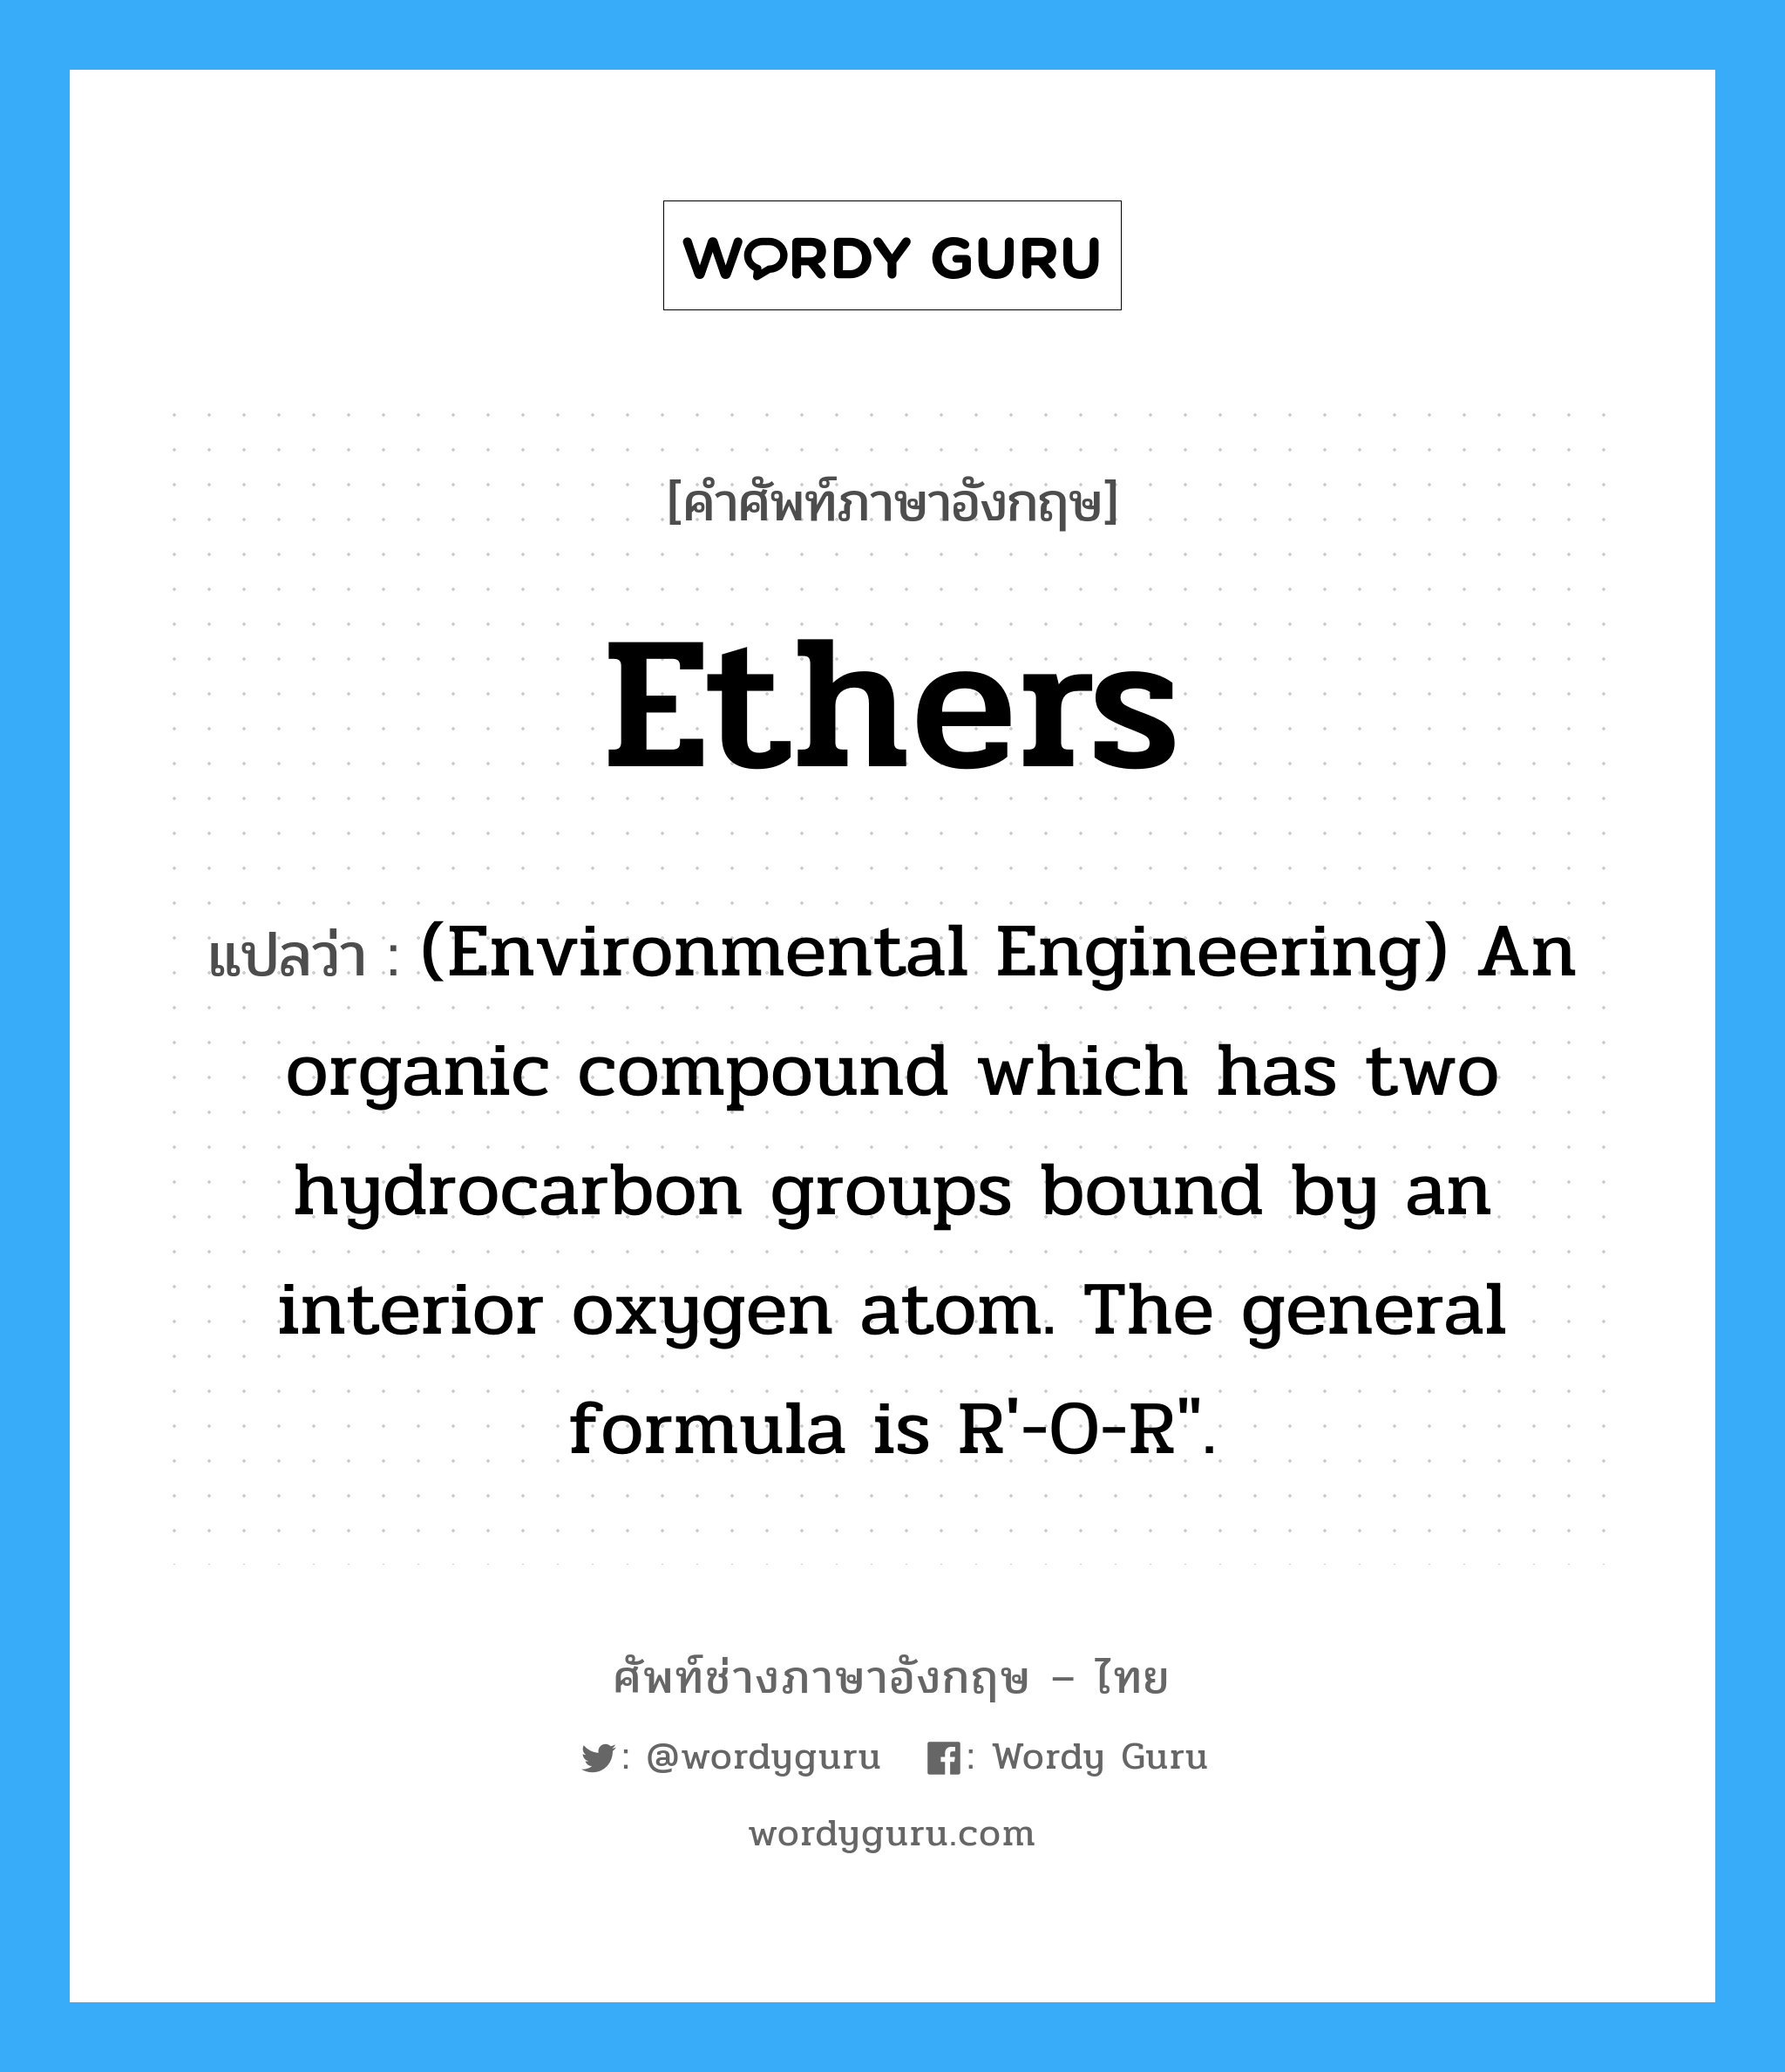 (Environmental Engineering) An organic compound which has two hydrocarbon groups bound by an interior oxygen atom. The general formula is R'-O-R". ภาษาอังกฤษ?, คำศัพท์ช่างภาษาอังกฤษ - ไทย (Environmental Engineering) An organic compound which has two hydrocarbon groups bound by an interior oxygen atom. The general formula is R'-O-R". คำศัพท์ภาษาอังกฤษ (Environmental Engineering) An organic compound which has two hydrocarbon groups bound by an interior oxygen atom. The general formula is R'-O-R". แปลว่า Ethers